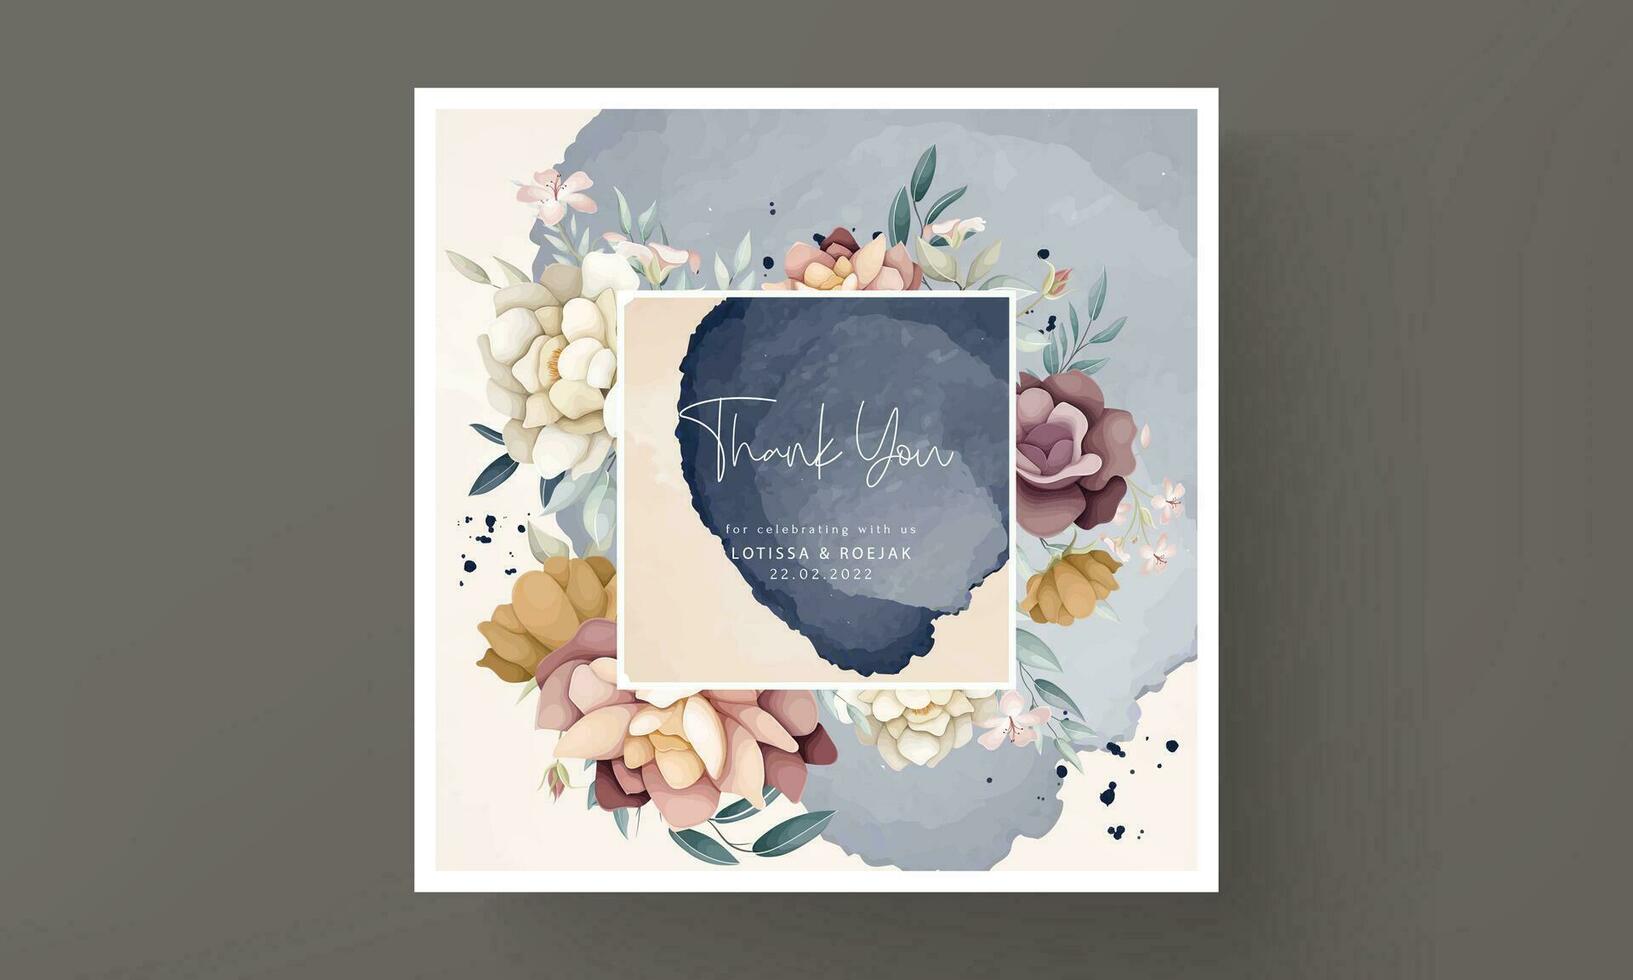 Illustration of a wedding invitation watercolor flower bouquet set branches brown leaves red flowers vector